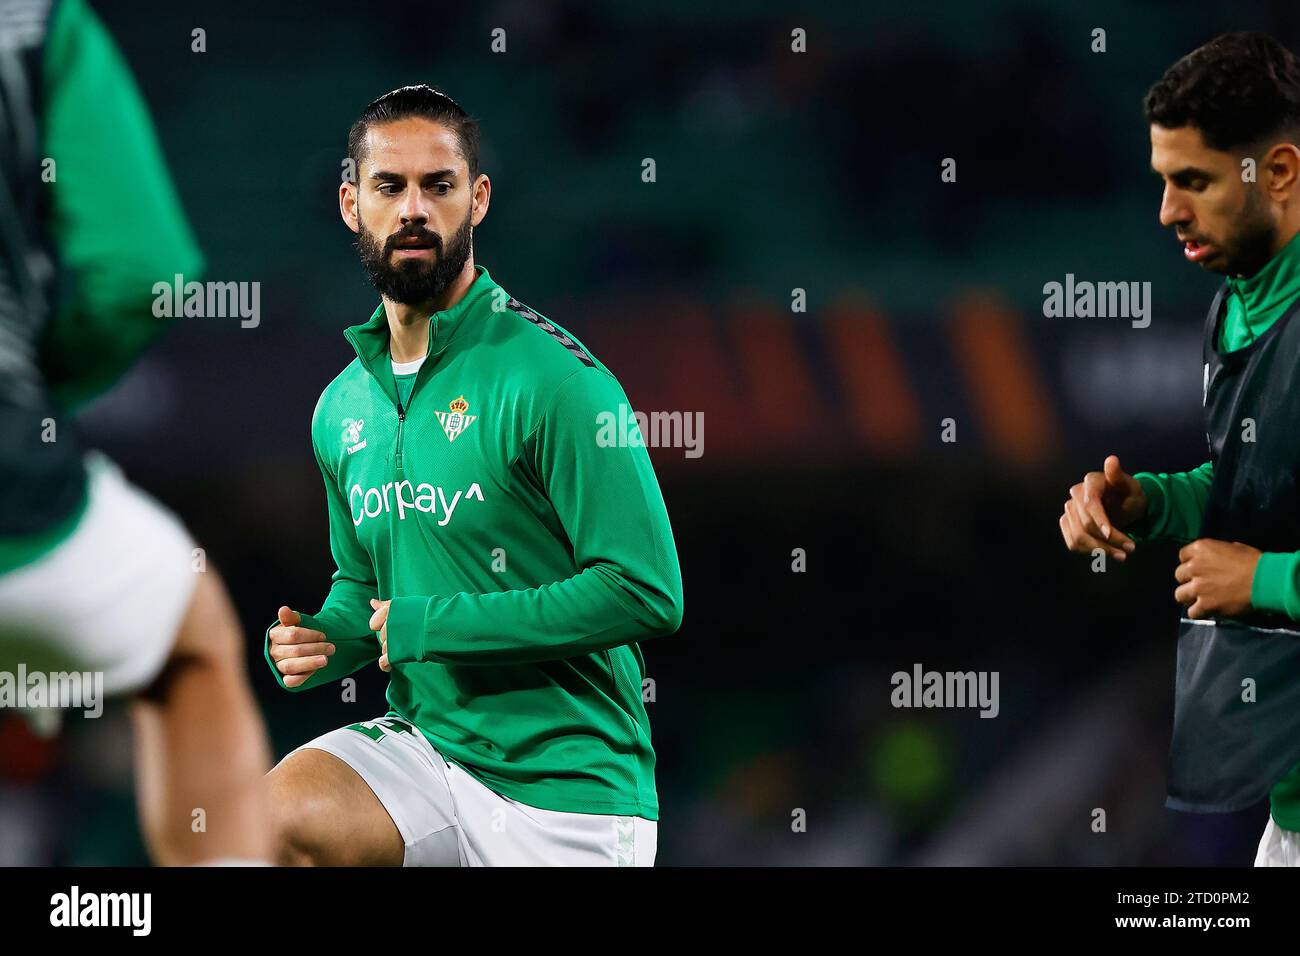 Seville, Spain. 14th December 2023. Isco (22) of Real Betis is waming up before the UEFA Europa League match between Real Betis and Rangers at the Estadio Benito Villamarin in Seville. (Photo credit: Gonzales Photo - Andres Gongora). Credit: Gonzales Photo/Alamy Live News Stock Photo